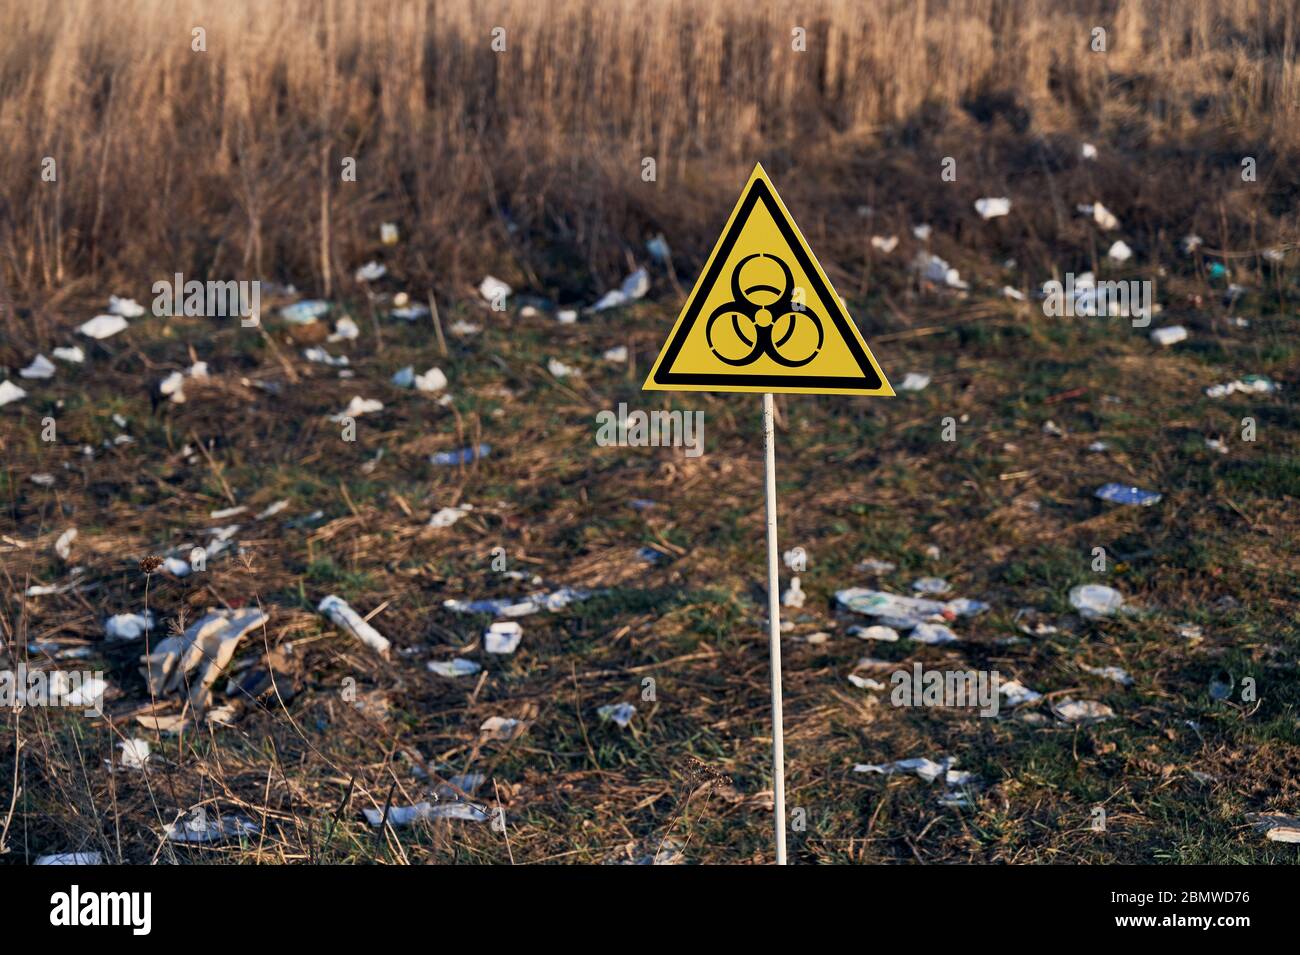 Yellow triangle with biological hazard sign warning about harmful biological substances and danger on abandoned territory with trash. Concept of ecology, environmental pollution and danger. Stock Photo